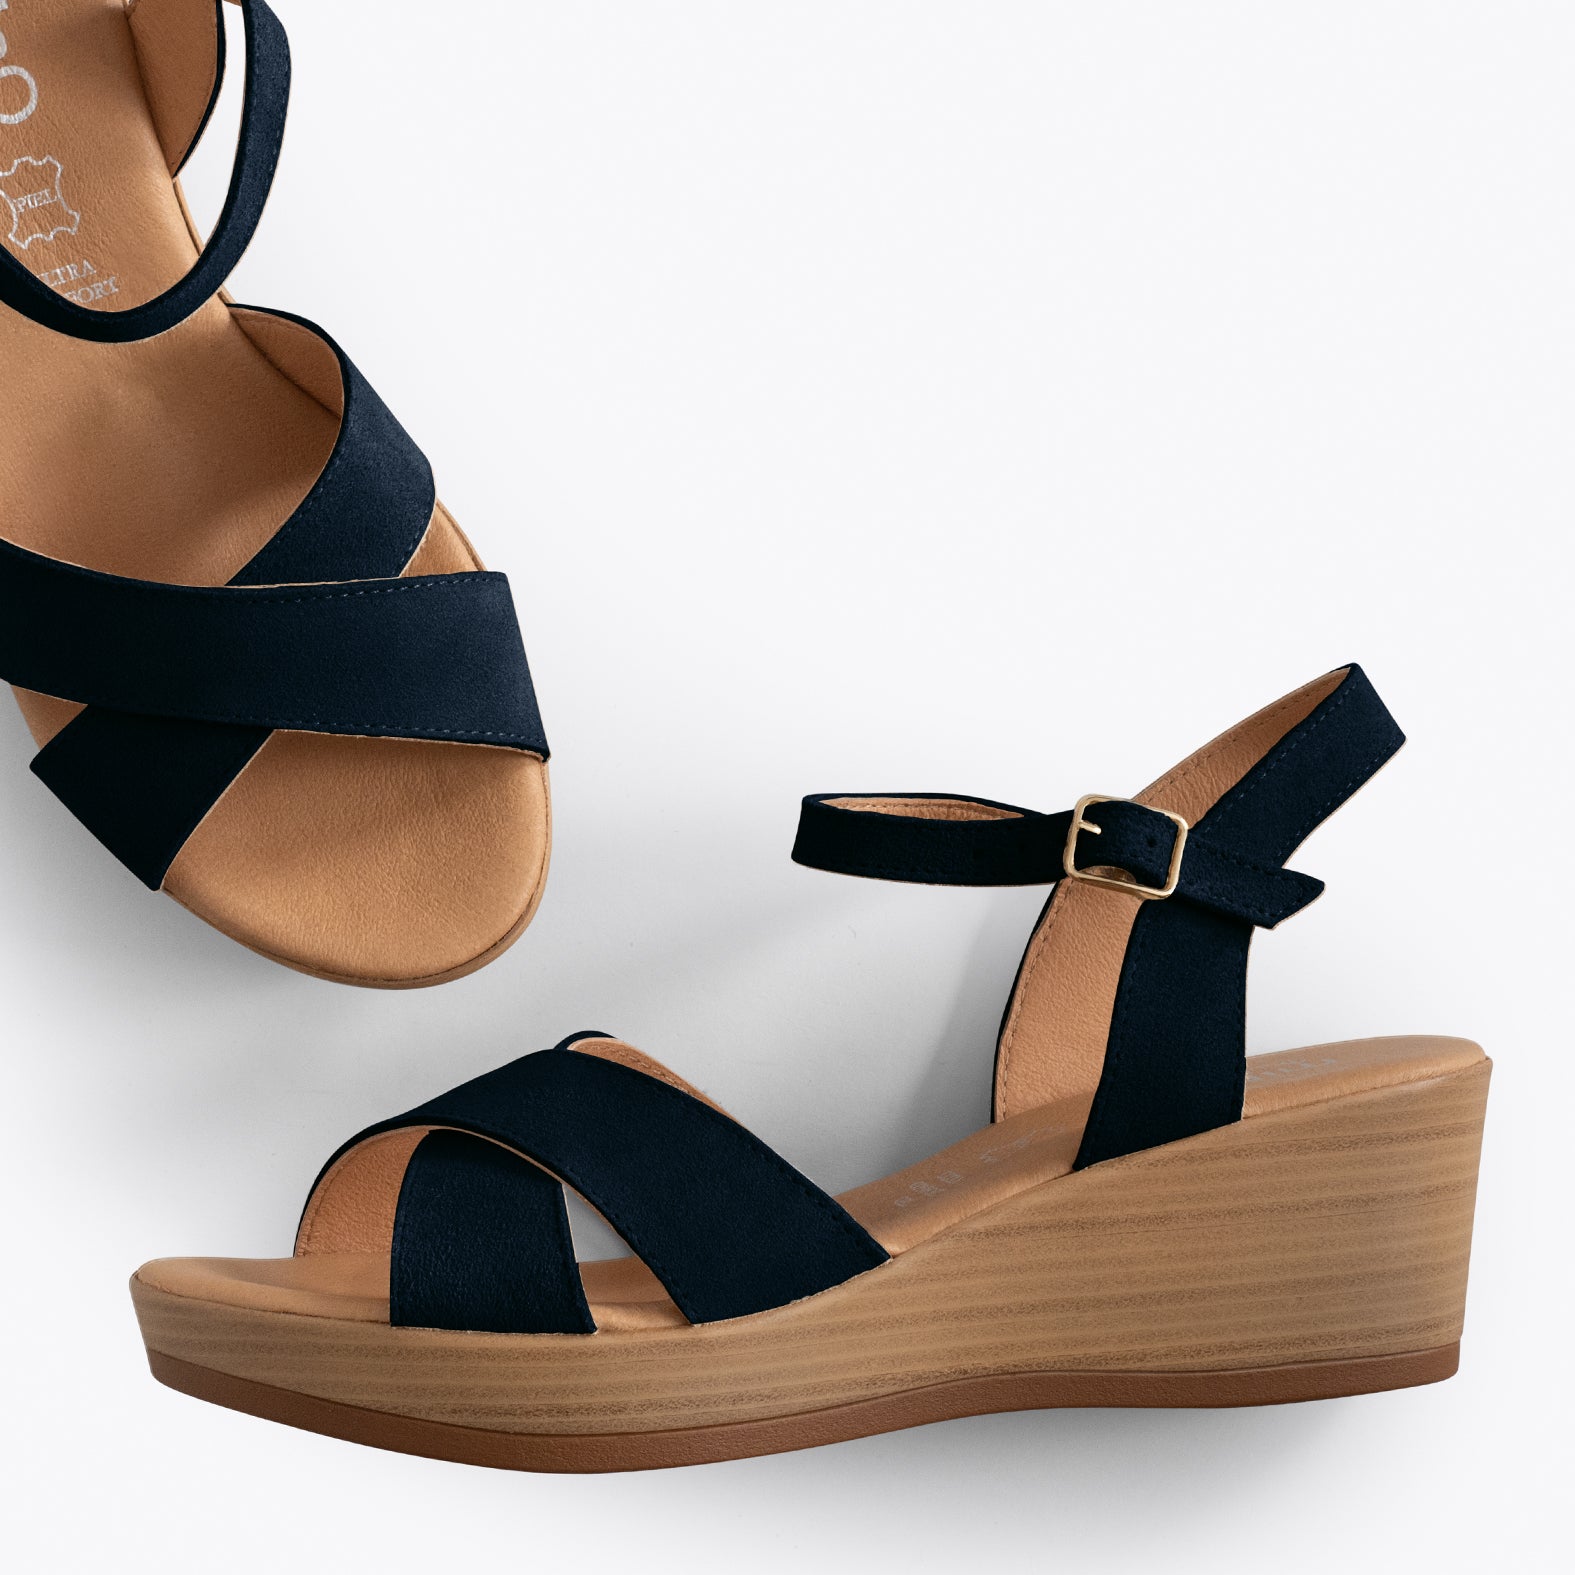 SEA- NAVY comfortable sandal with wedge